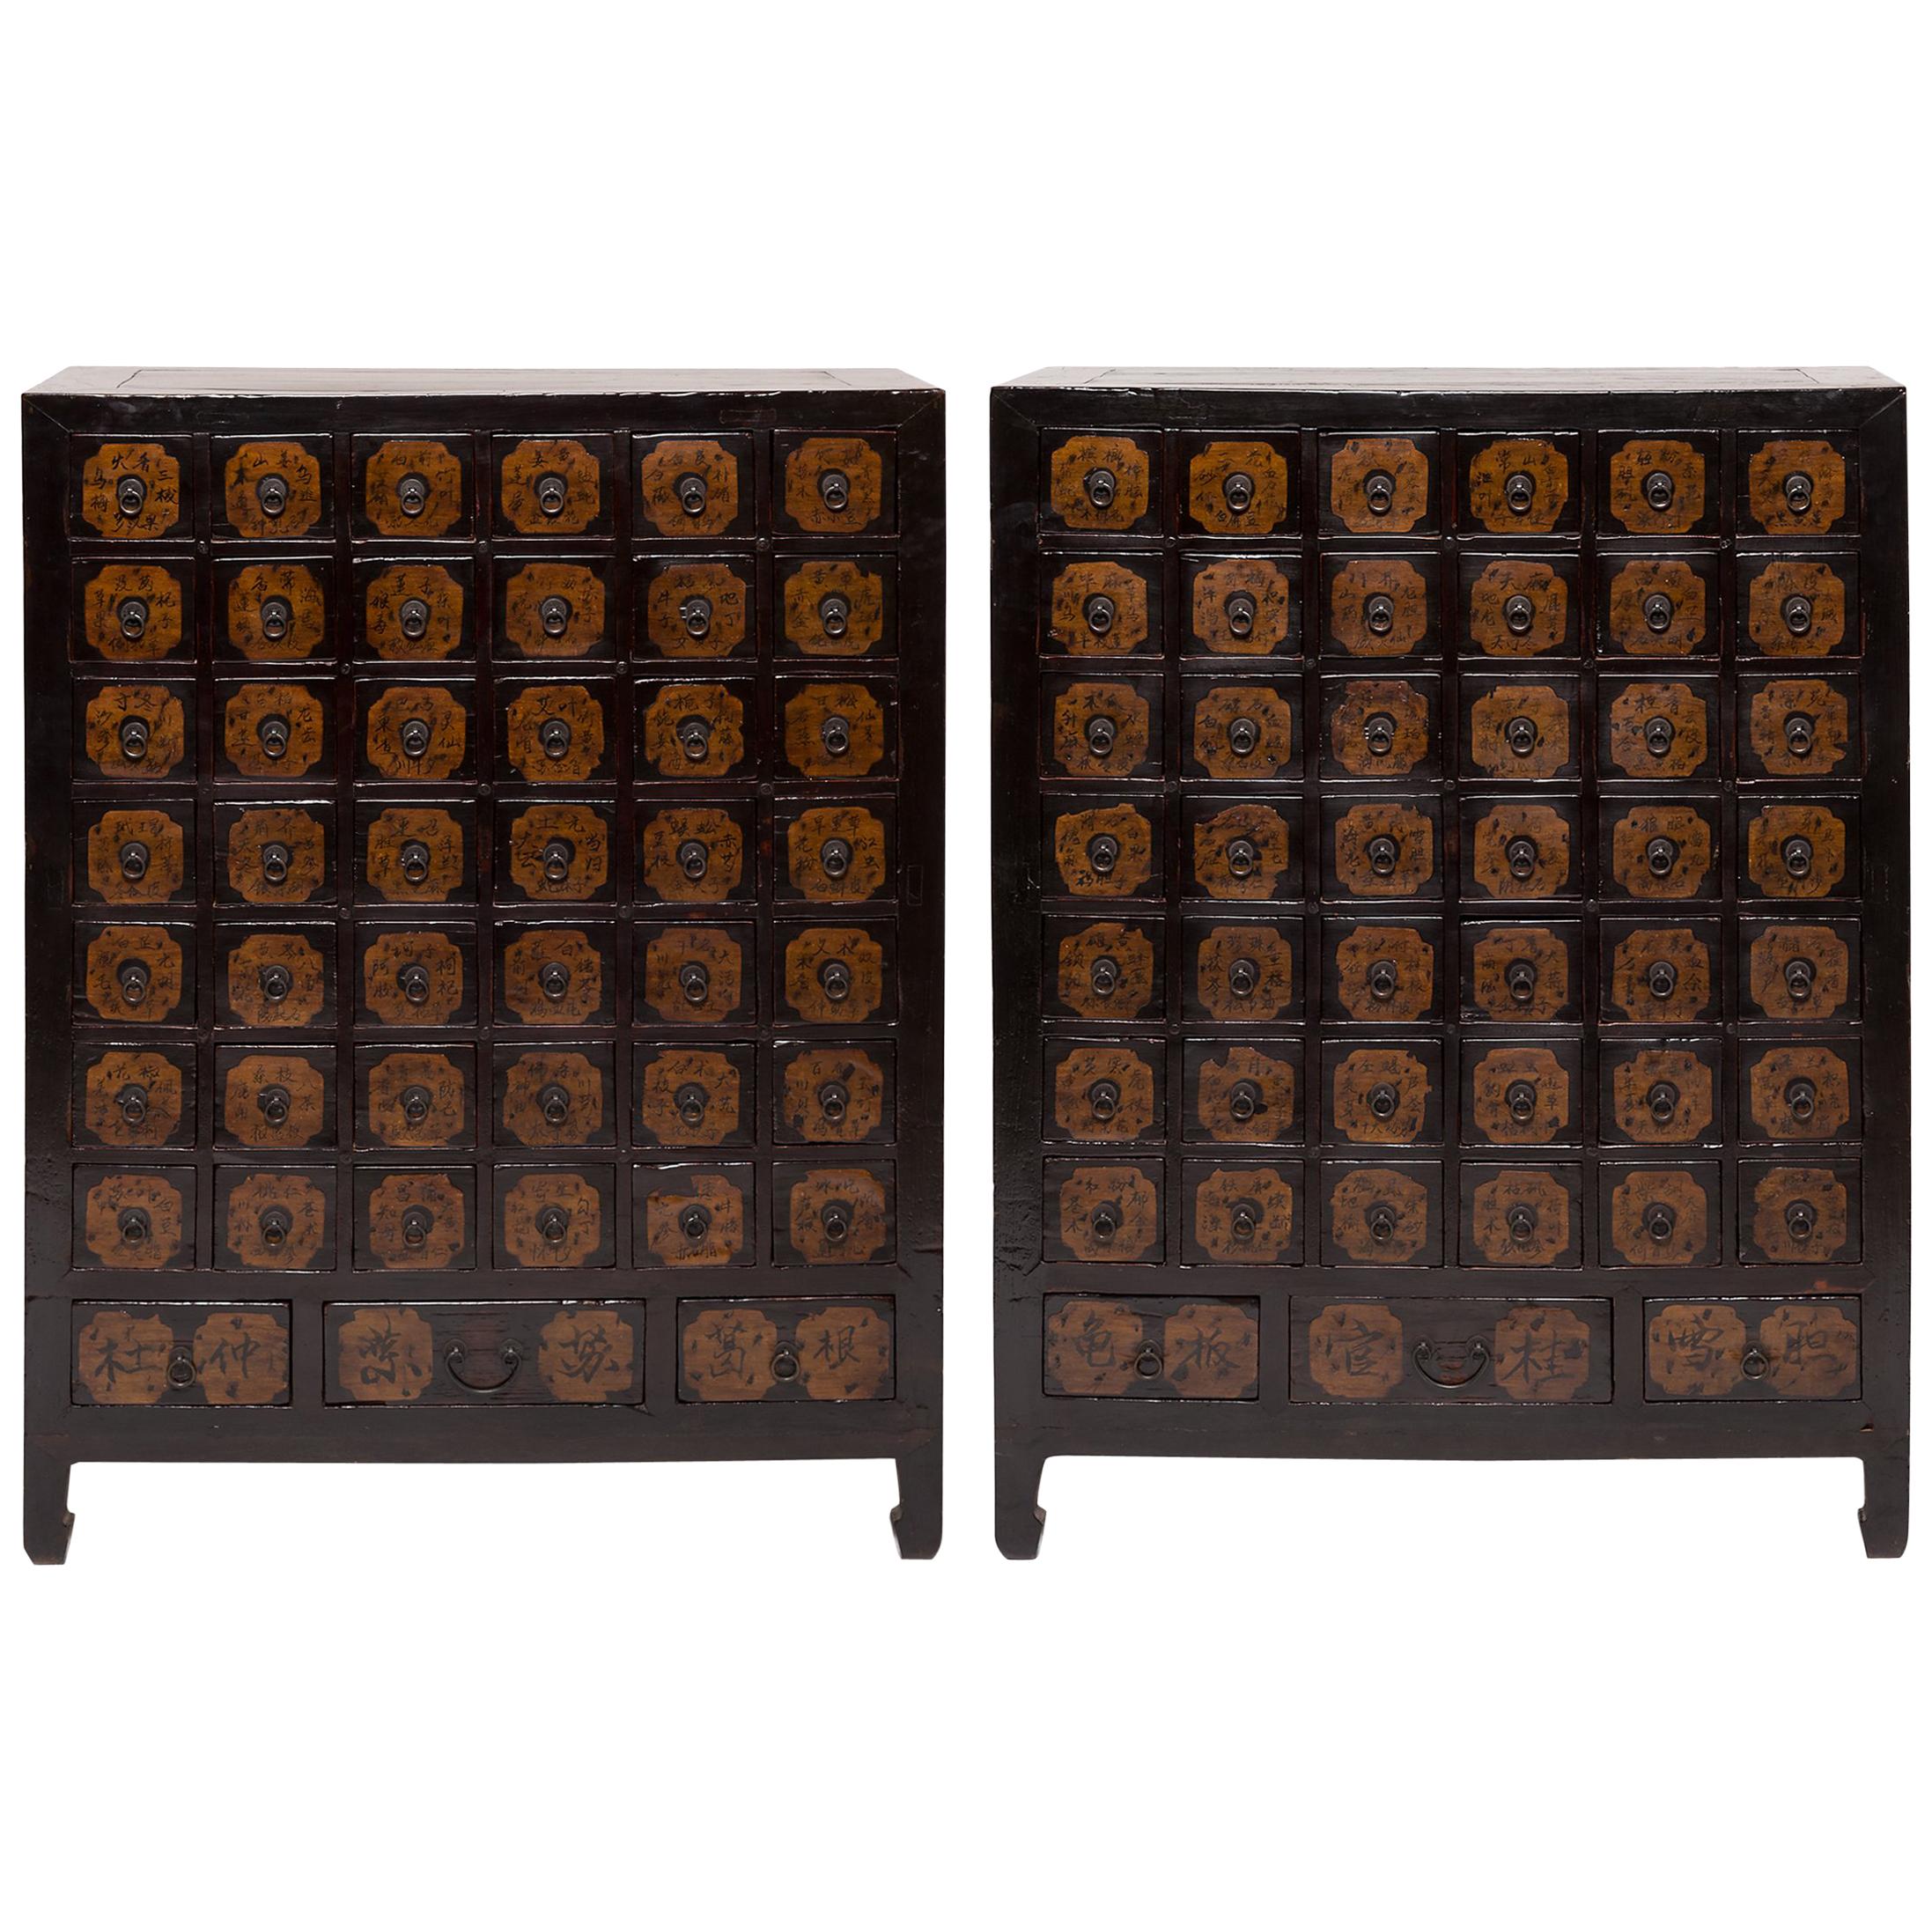 Pair of 19th Century Chinese Apothecary Chests